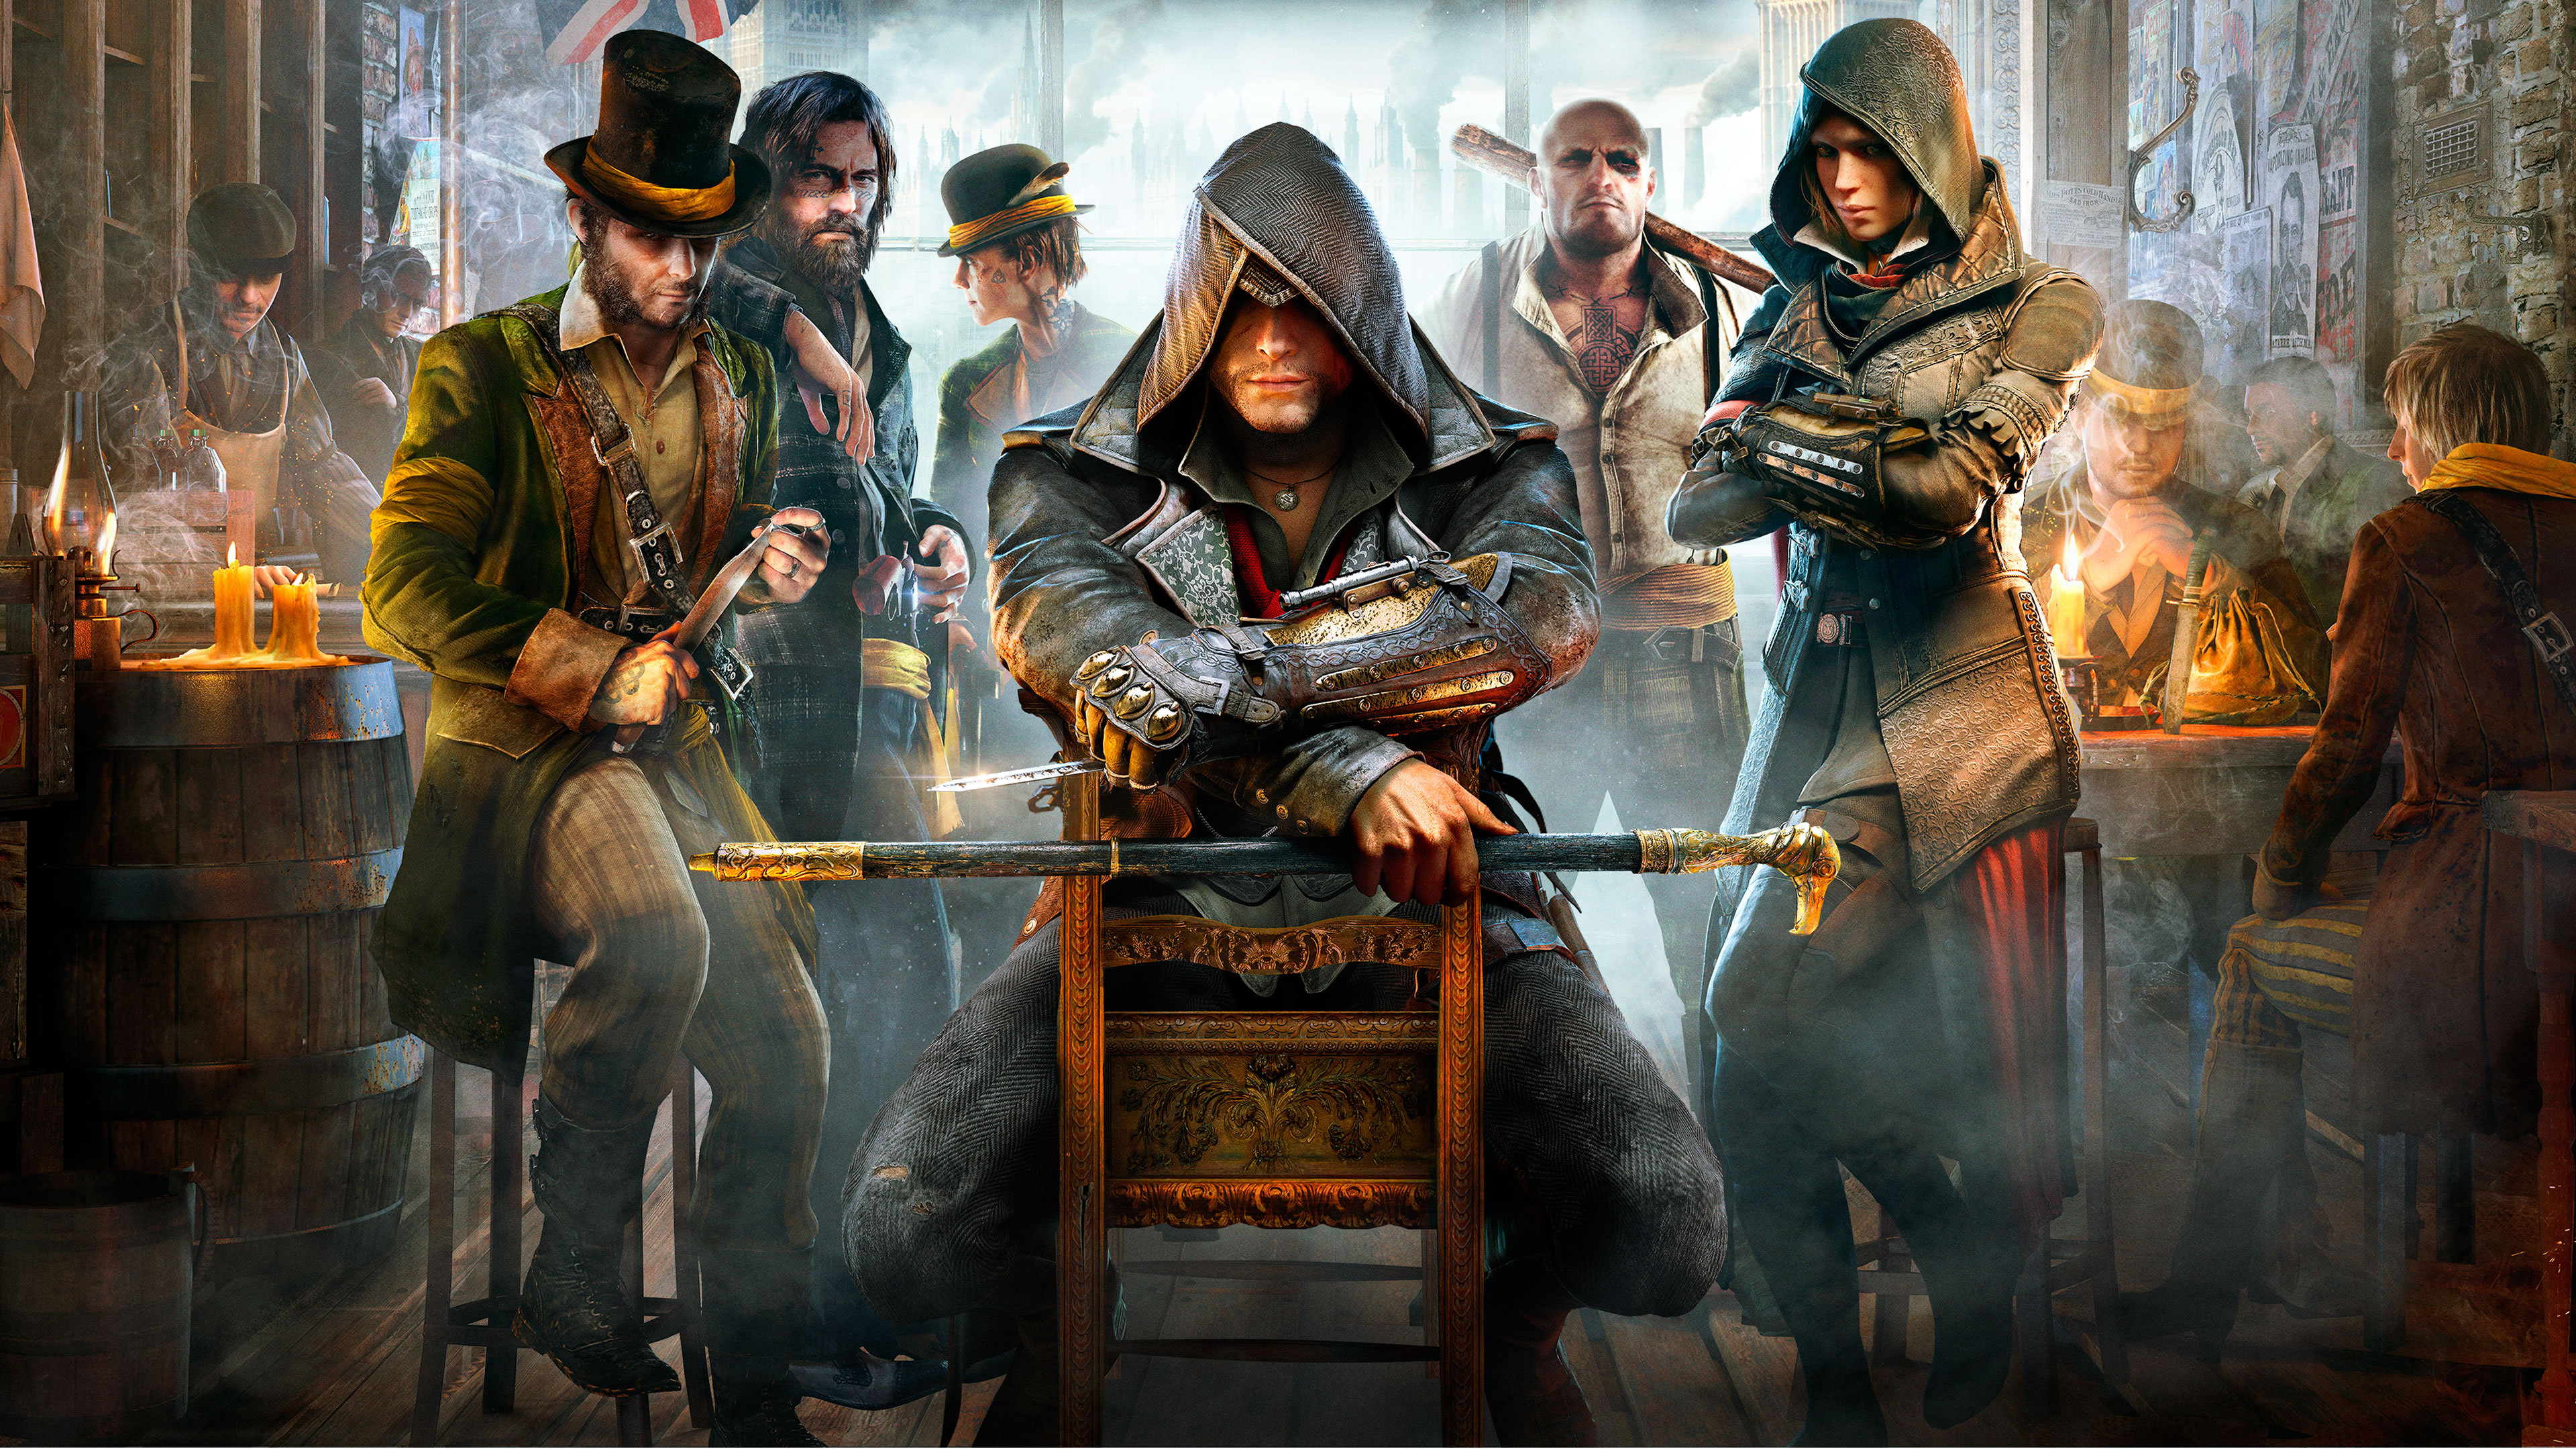 Digital Dimension collaborates with Ubisoft® once again on the game ASSASSIN’S CREED® SYNDICATE